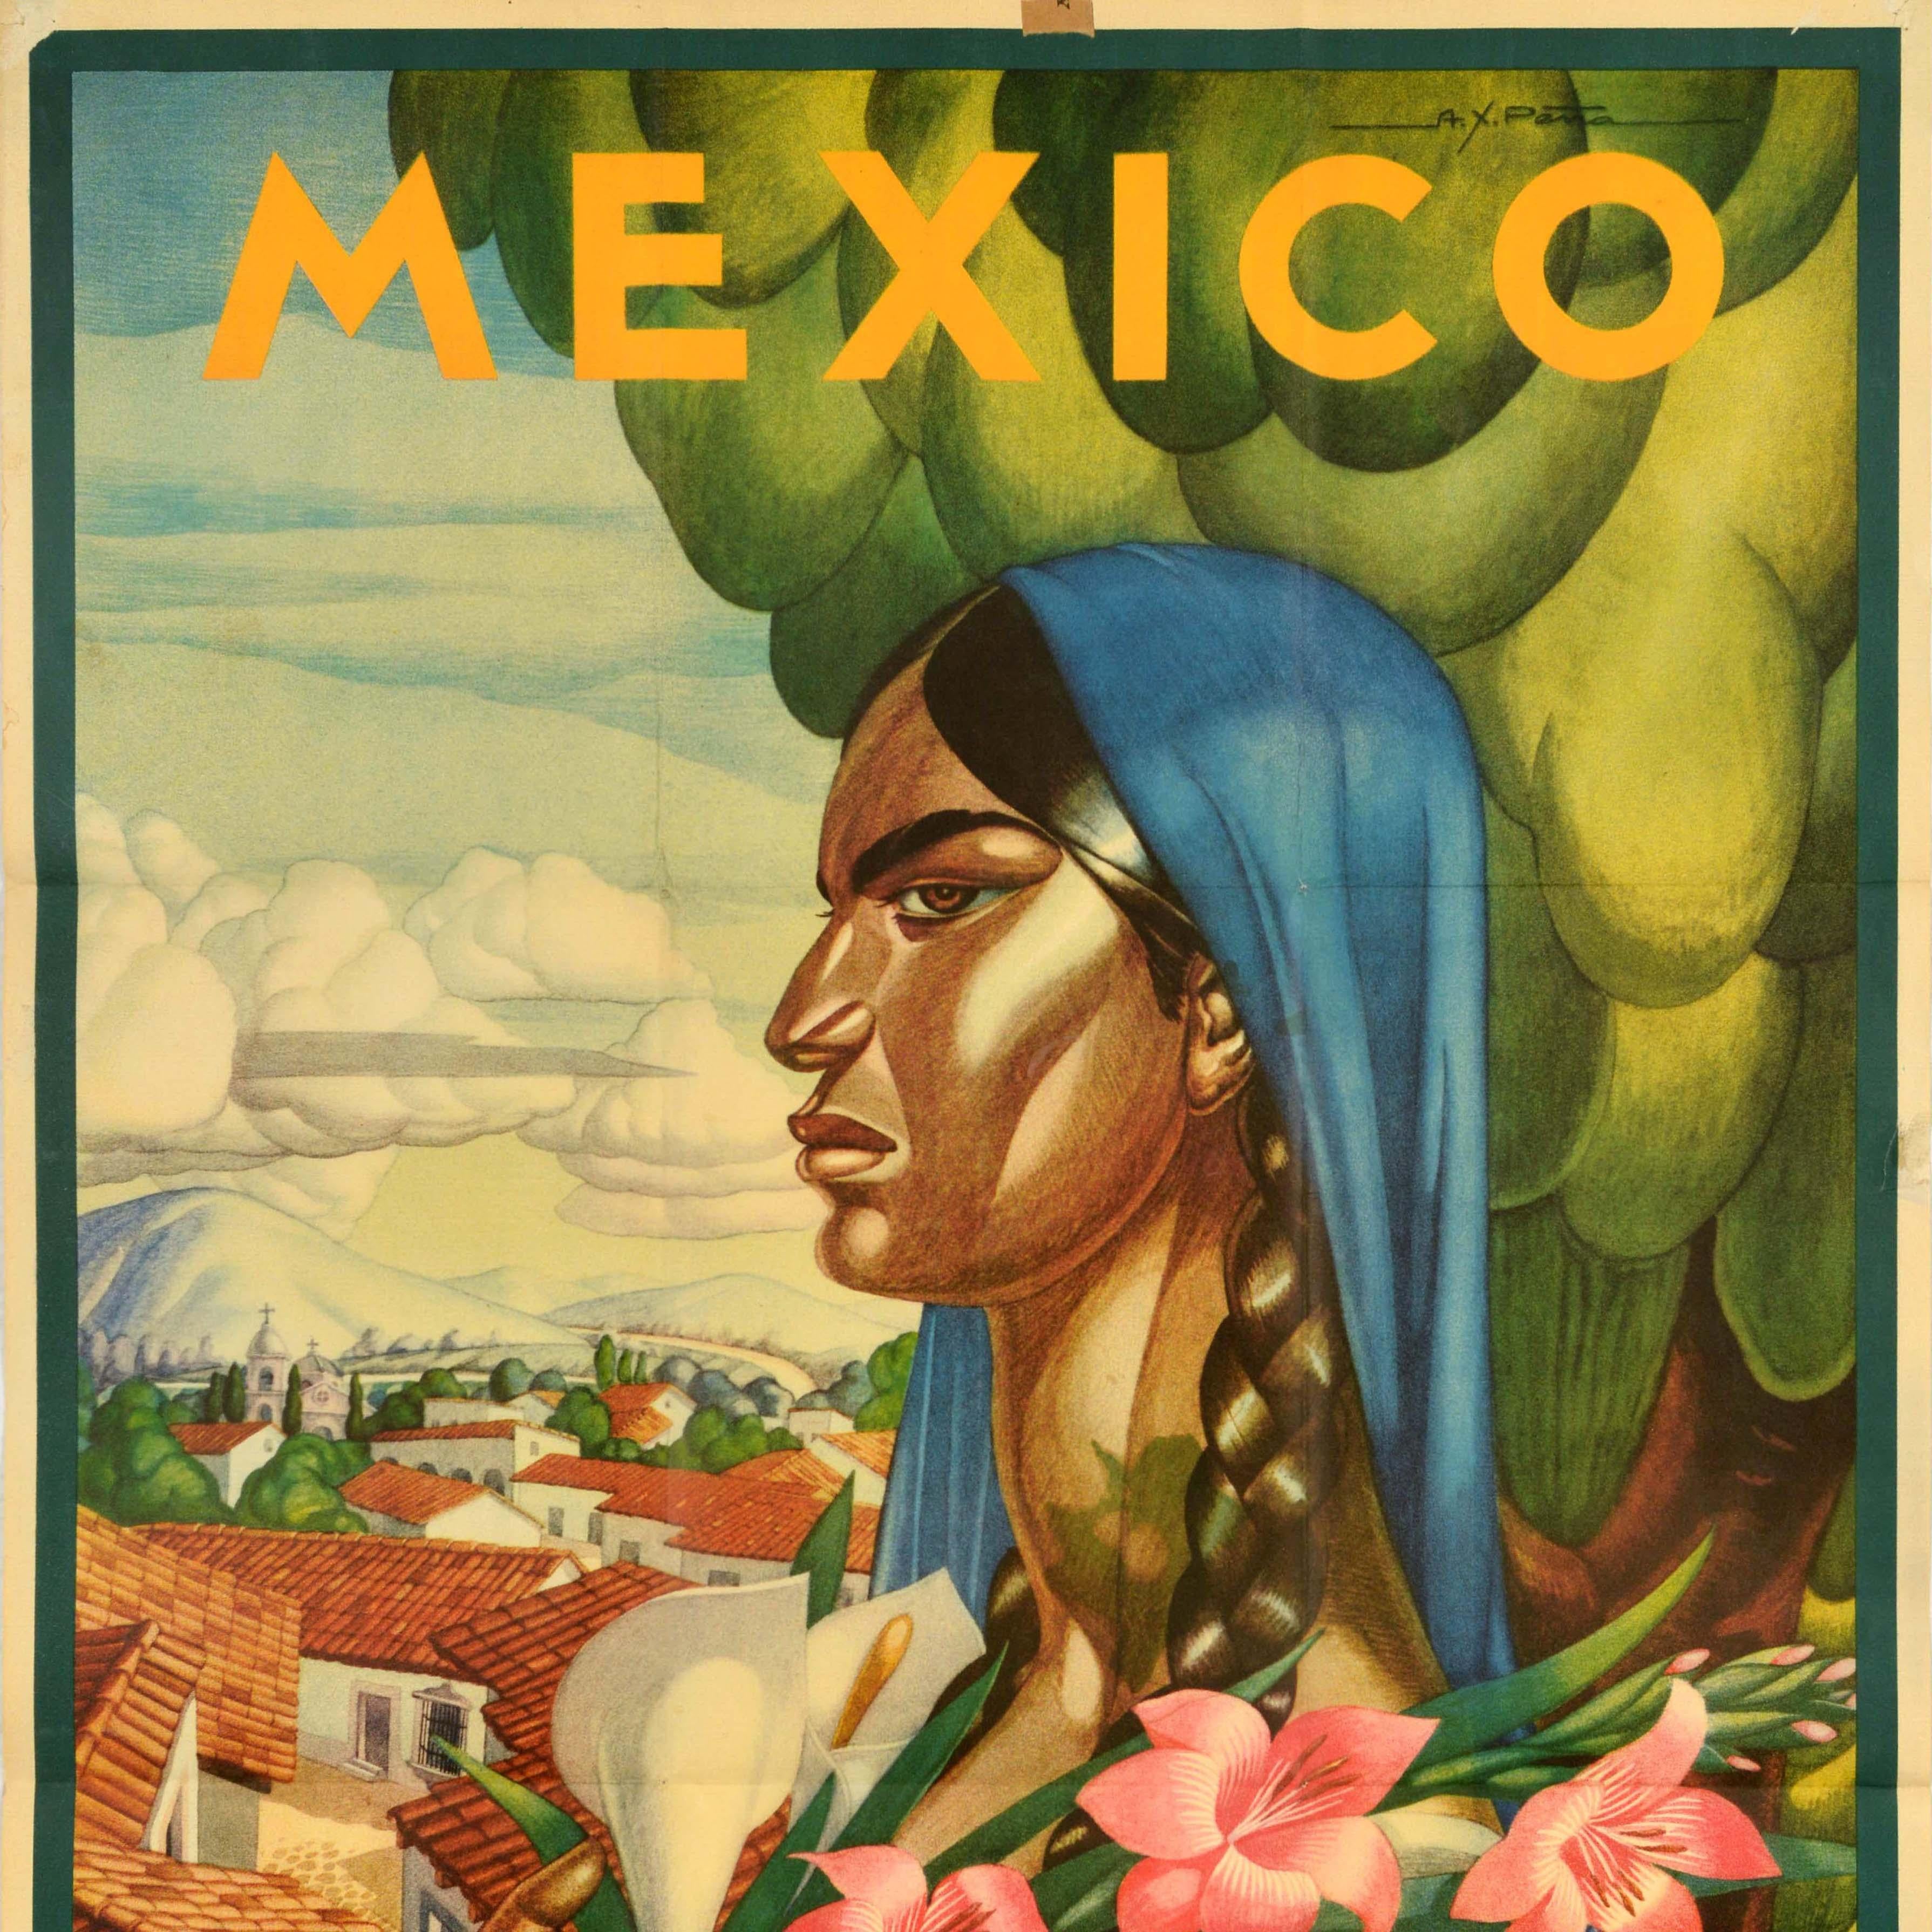 Original Vintage Travel Poster Mexico Alfonso X Pena Midcentury Art - Brown Print by Alfonso X. Pena